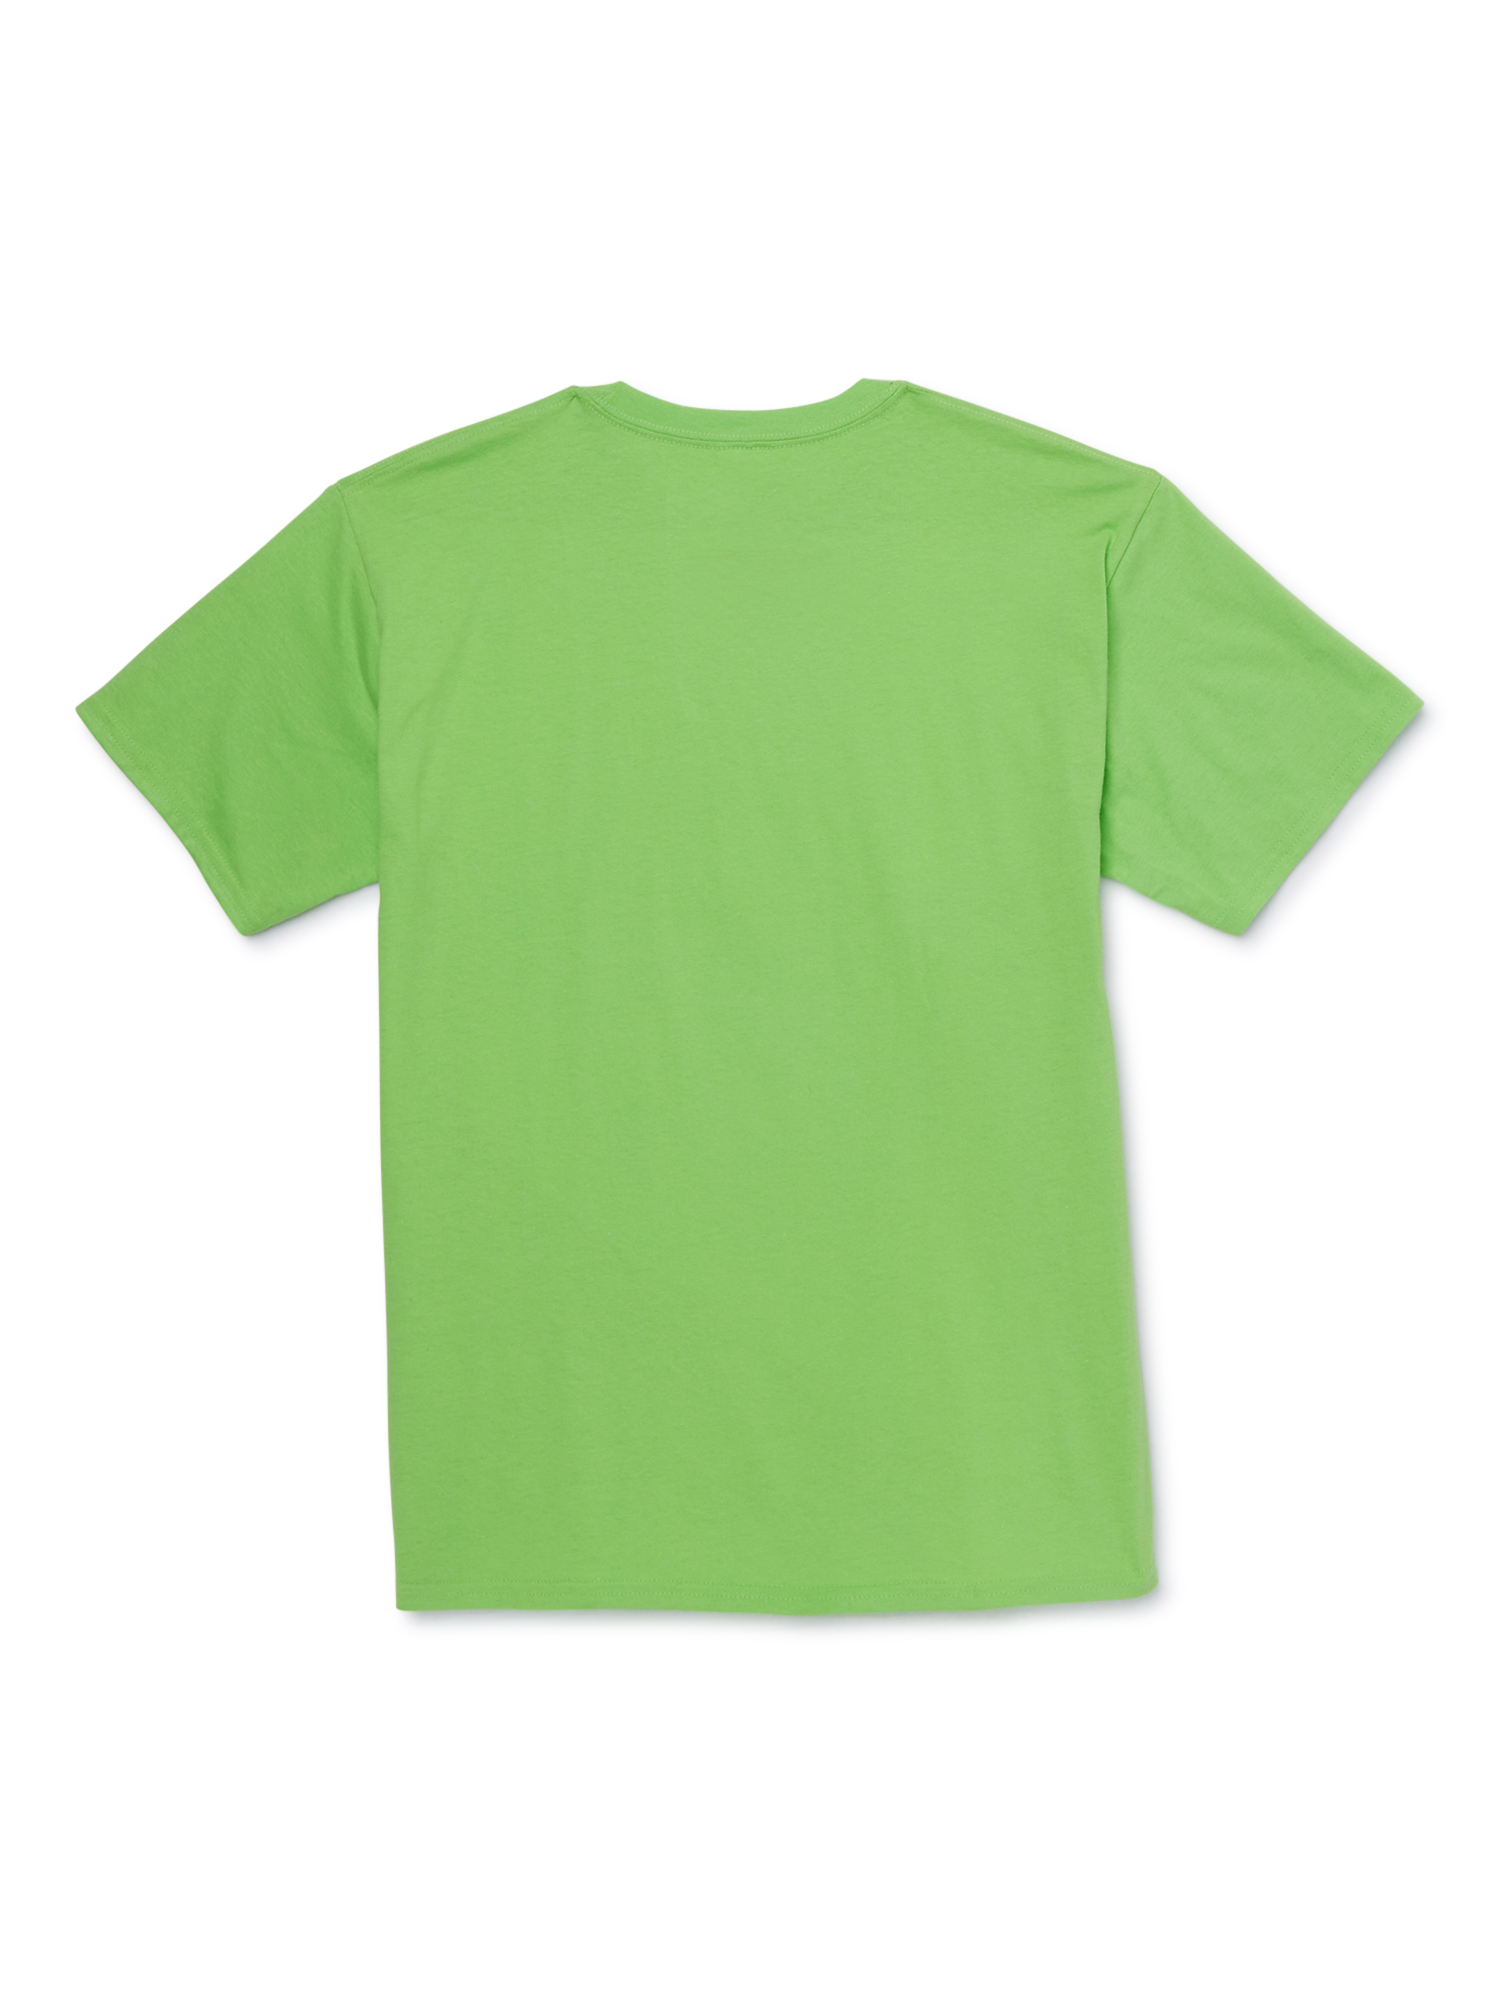 Ryan's World Short Sleeve Graphic Crew Neck Relaxed Fit T-Shirt (Little Boys or Big Boys) 2 Pack - image 5 of 6